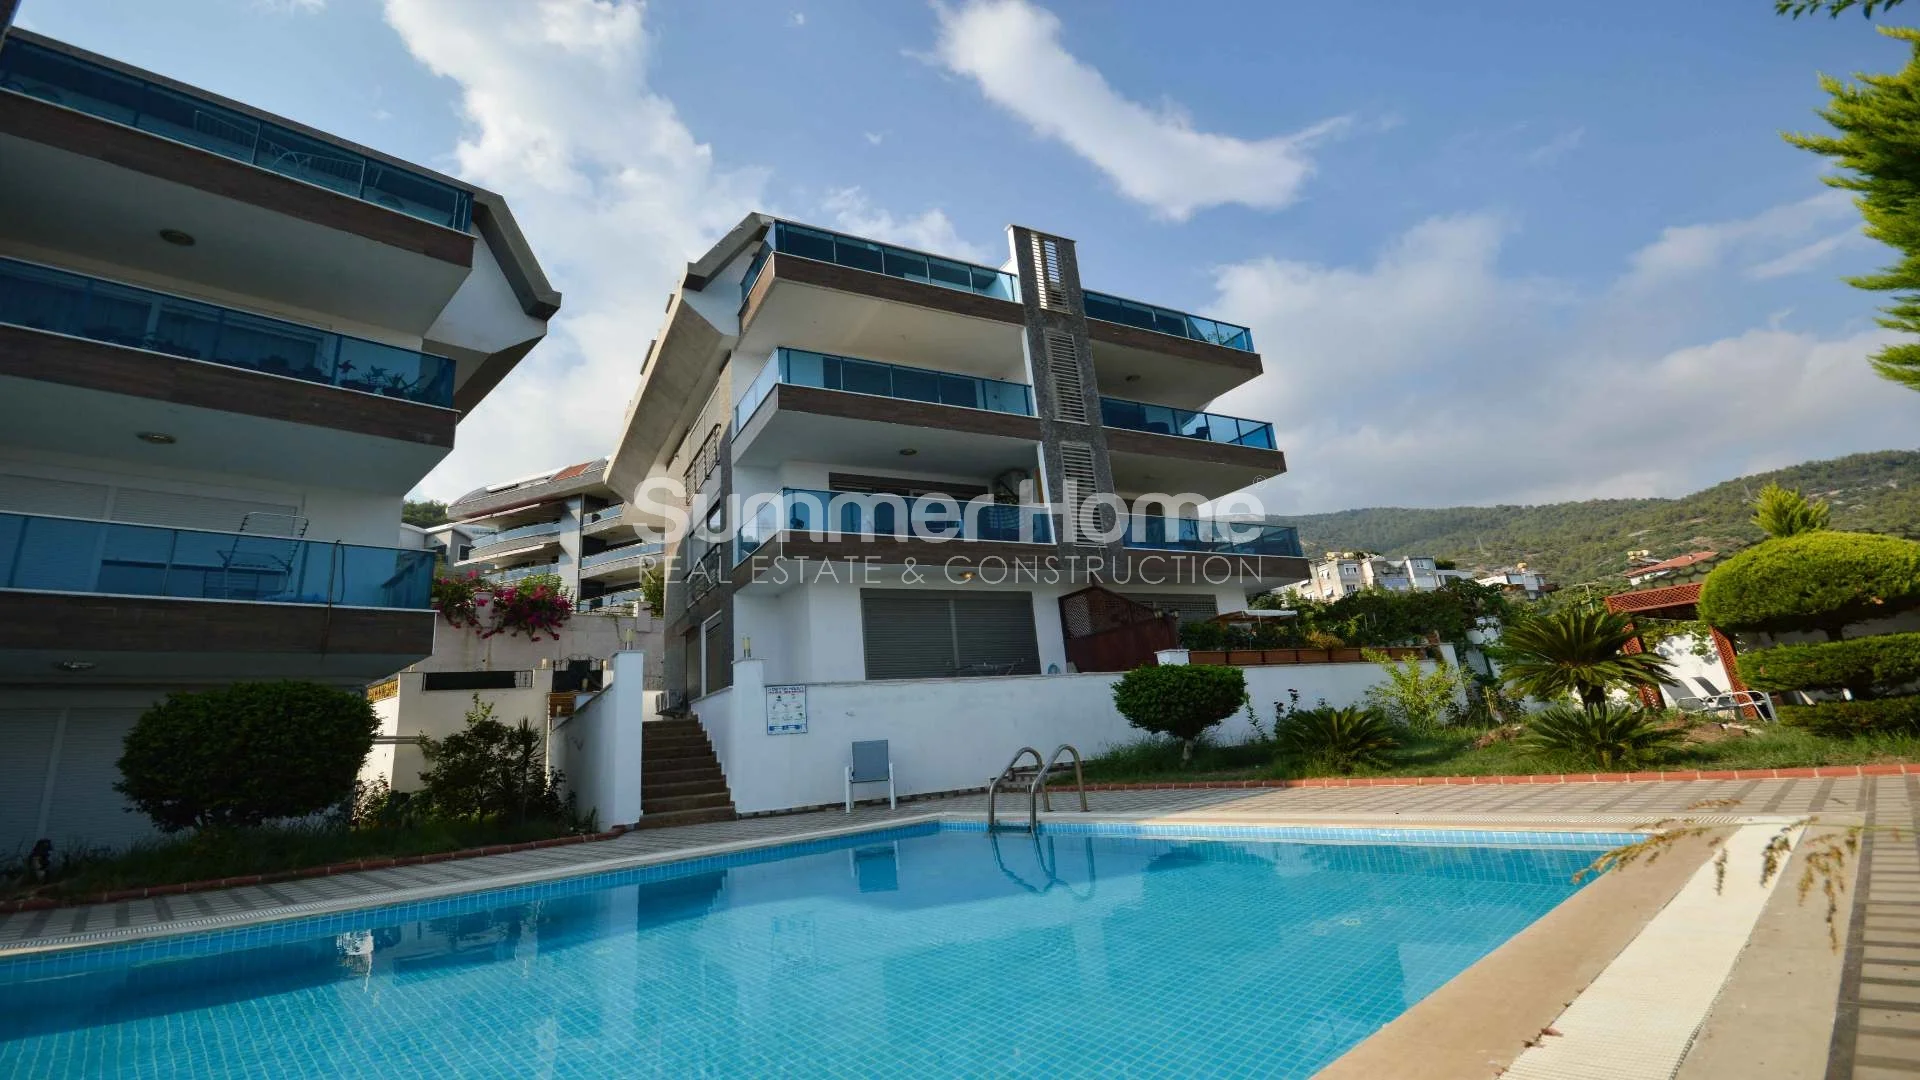 For sale Apartment Alanya Hasbahce general - 1